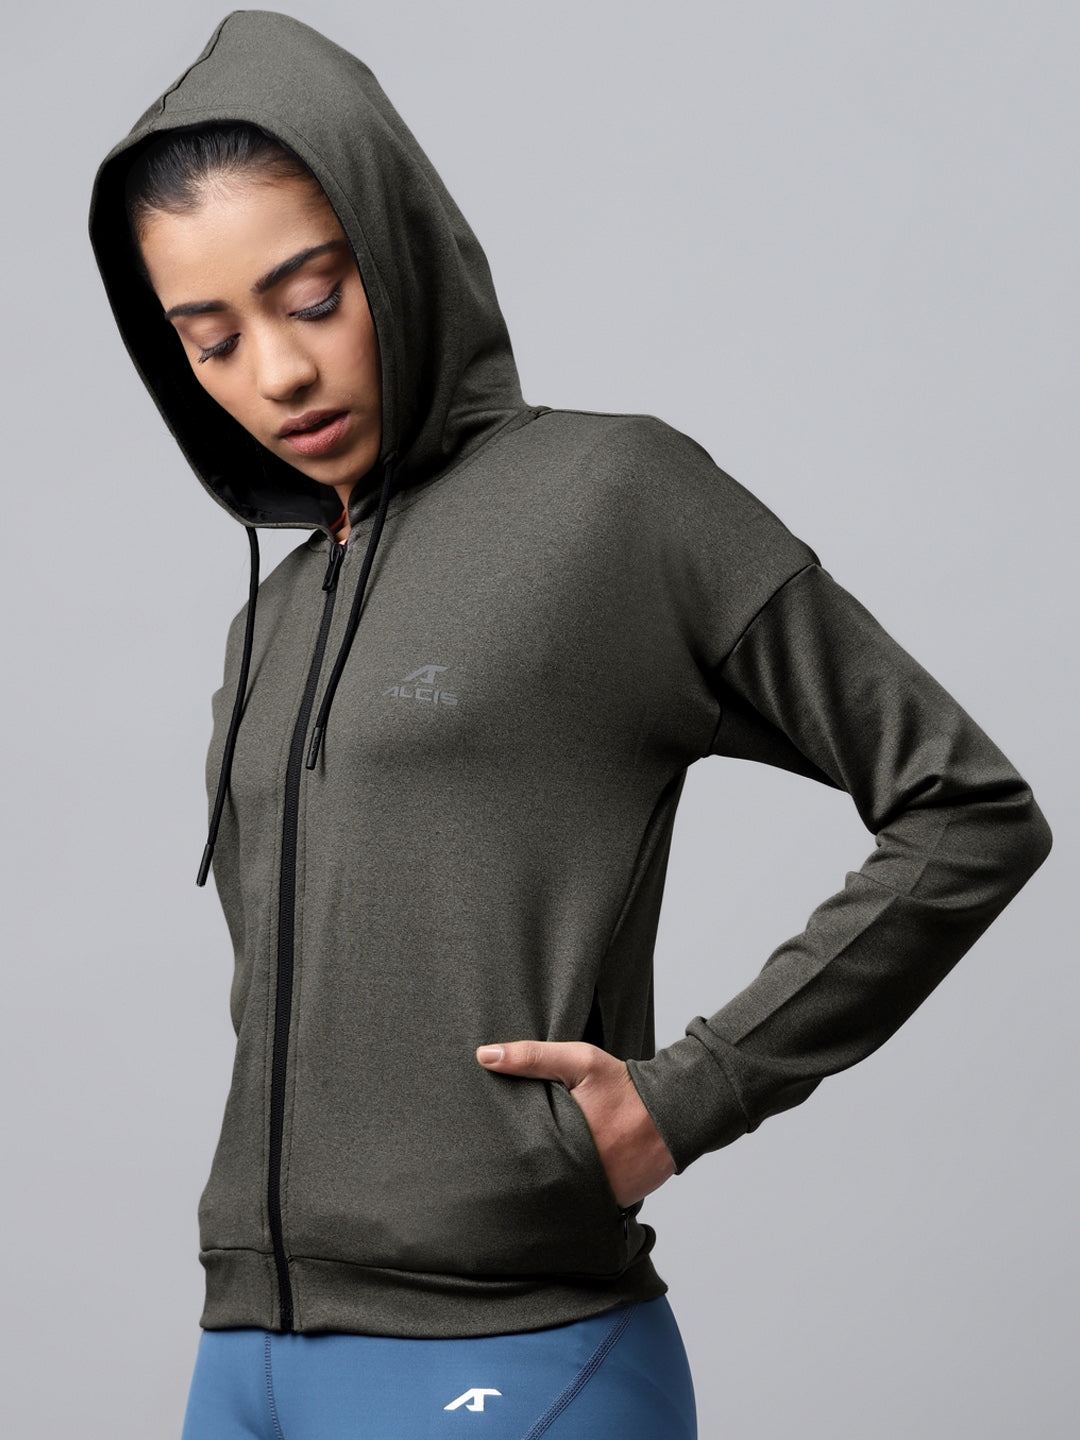 Alcis Women Charcoal Grey Hooded Solid Training Jacket